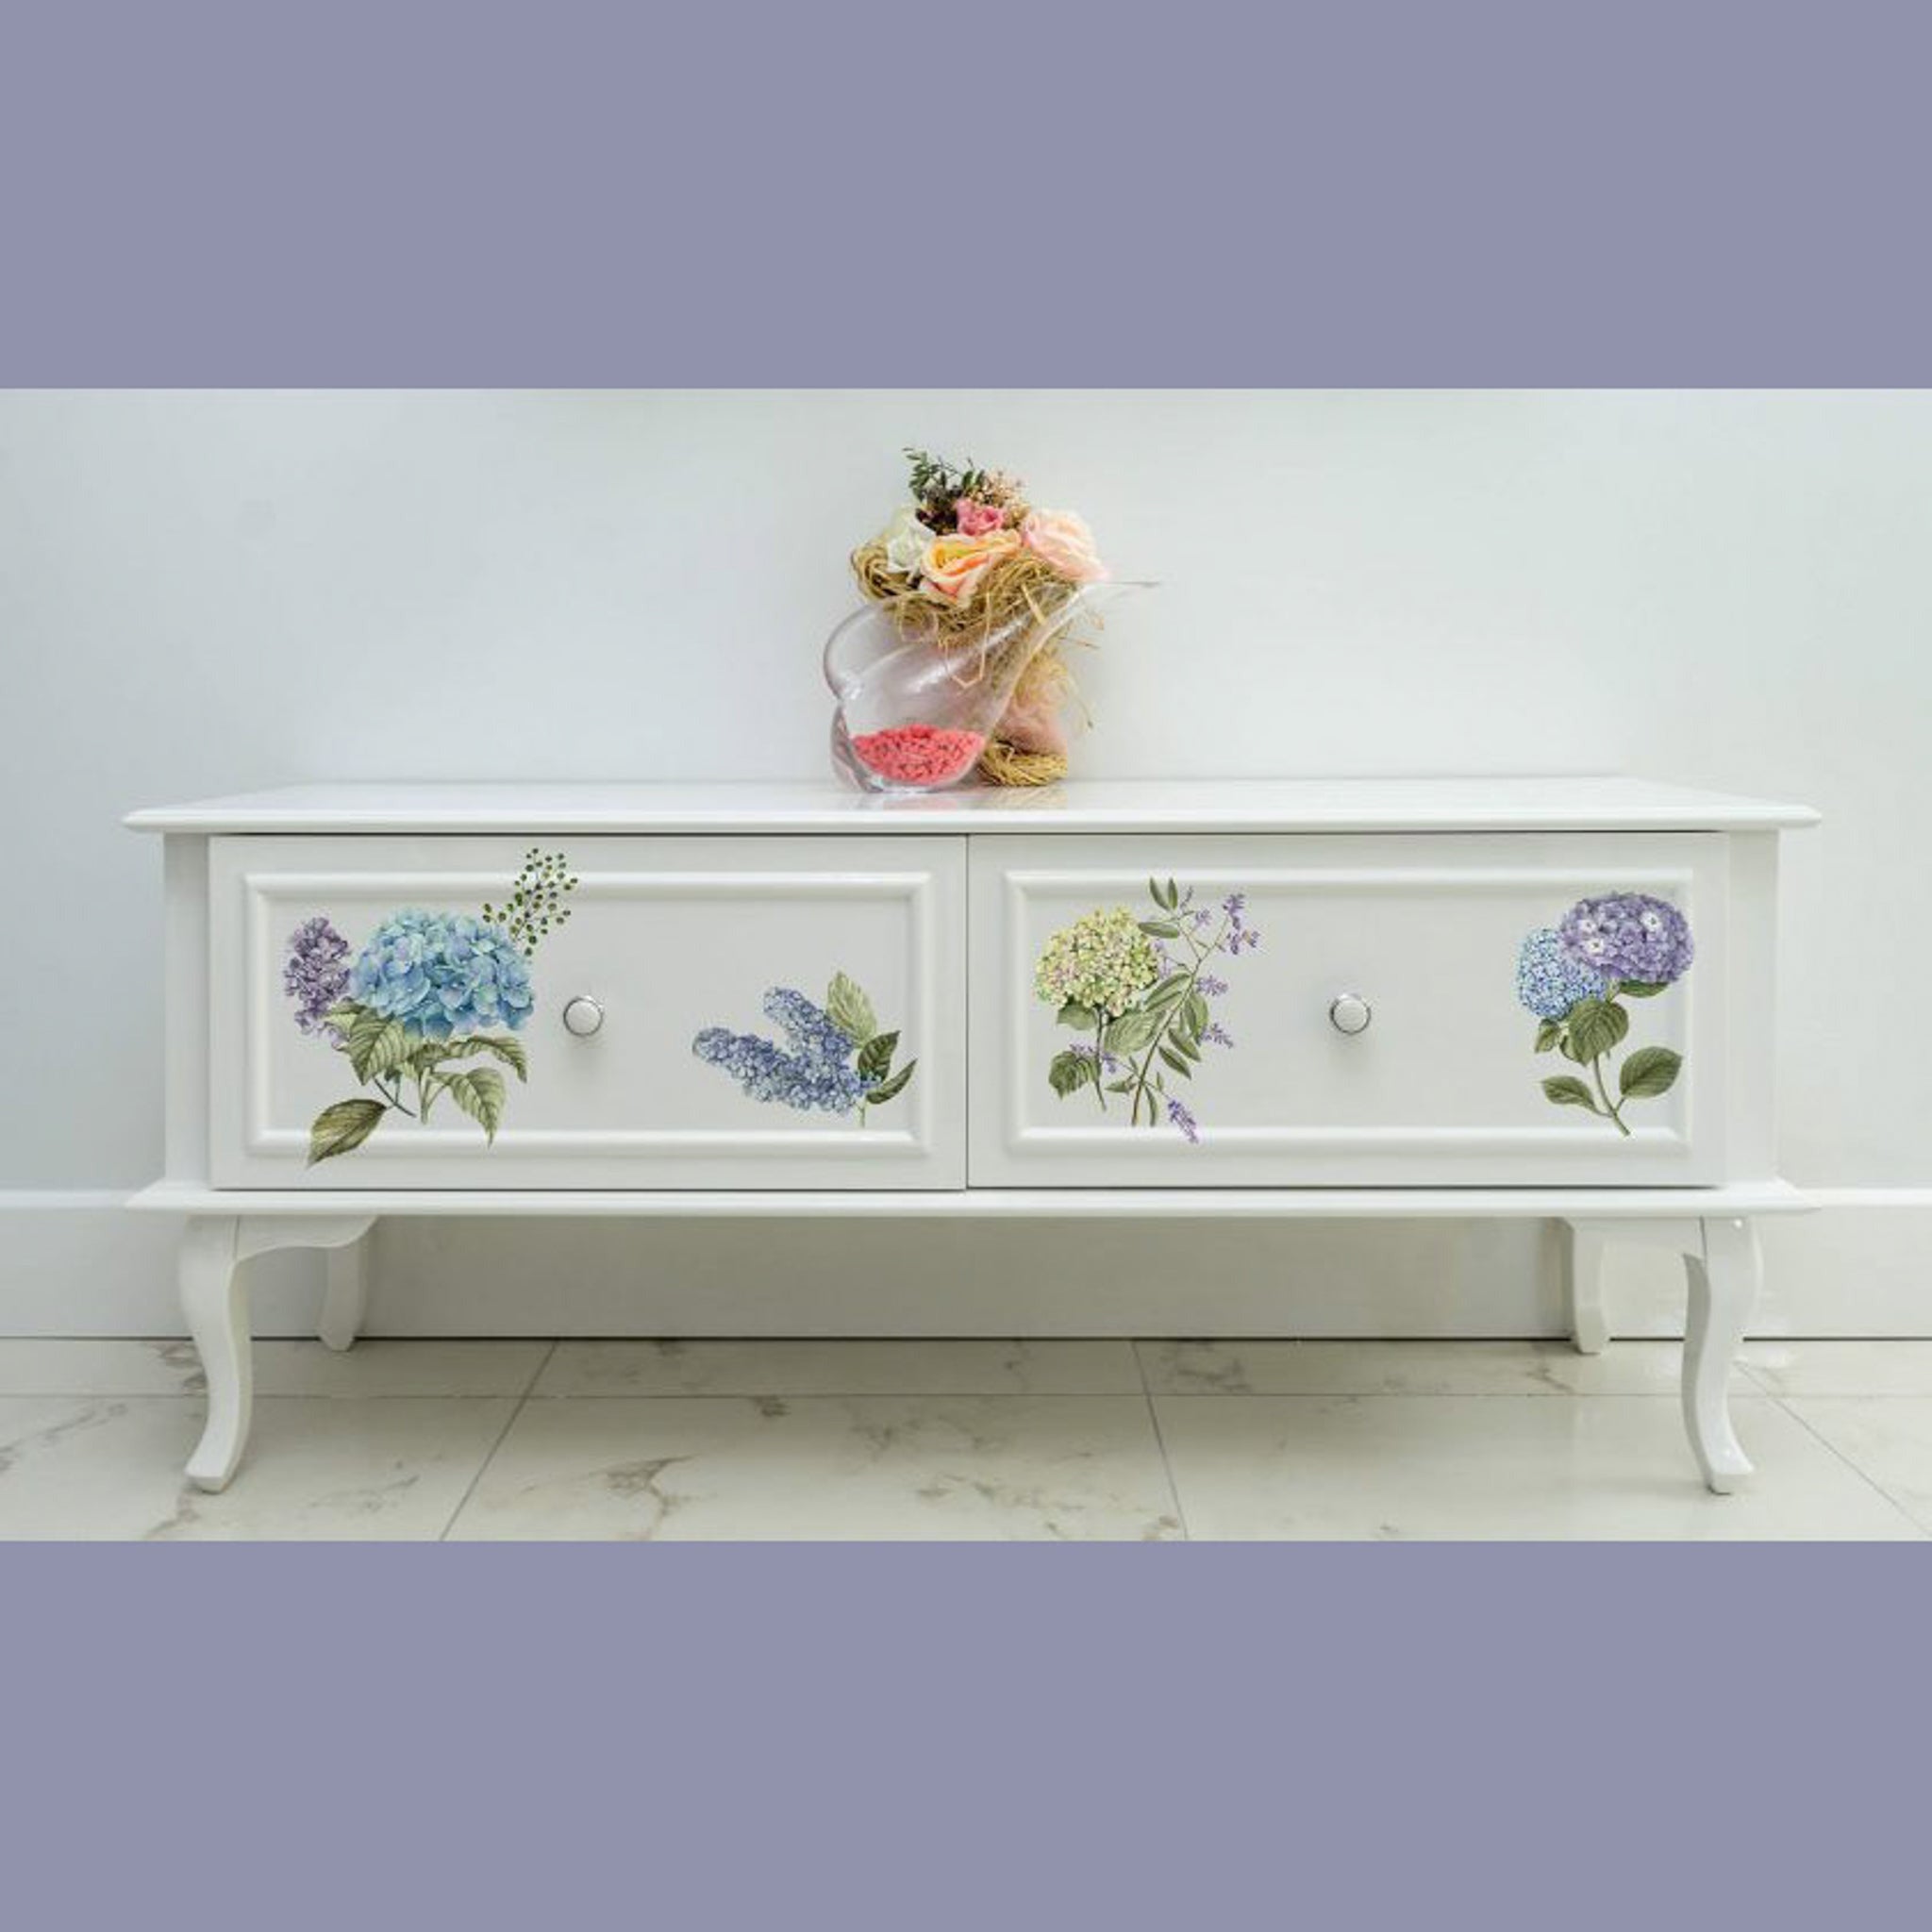 A vintage 2 drawer coffee table is painted white and features ReDesign with Prima's Mystic Hydrangea small transfer on the drawers.